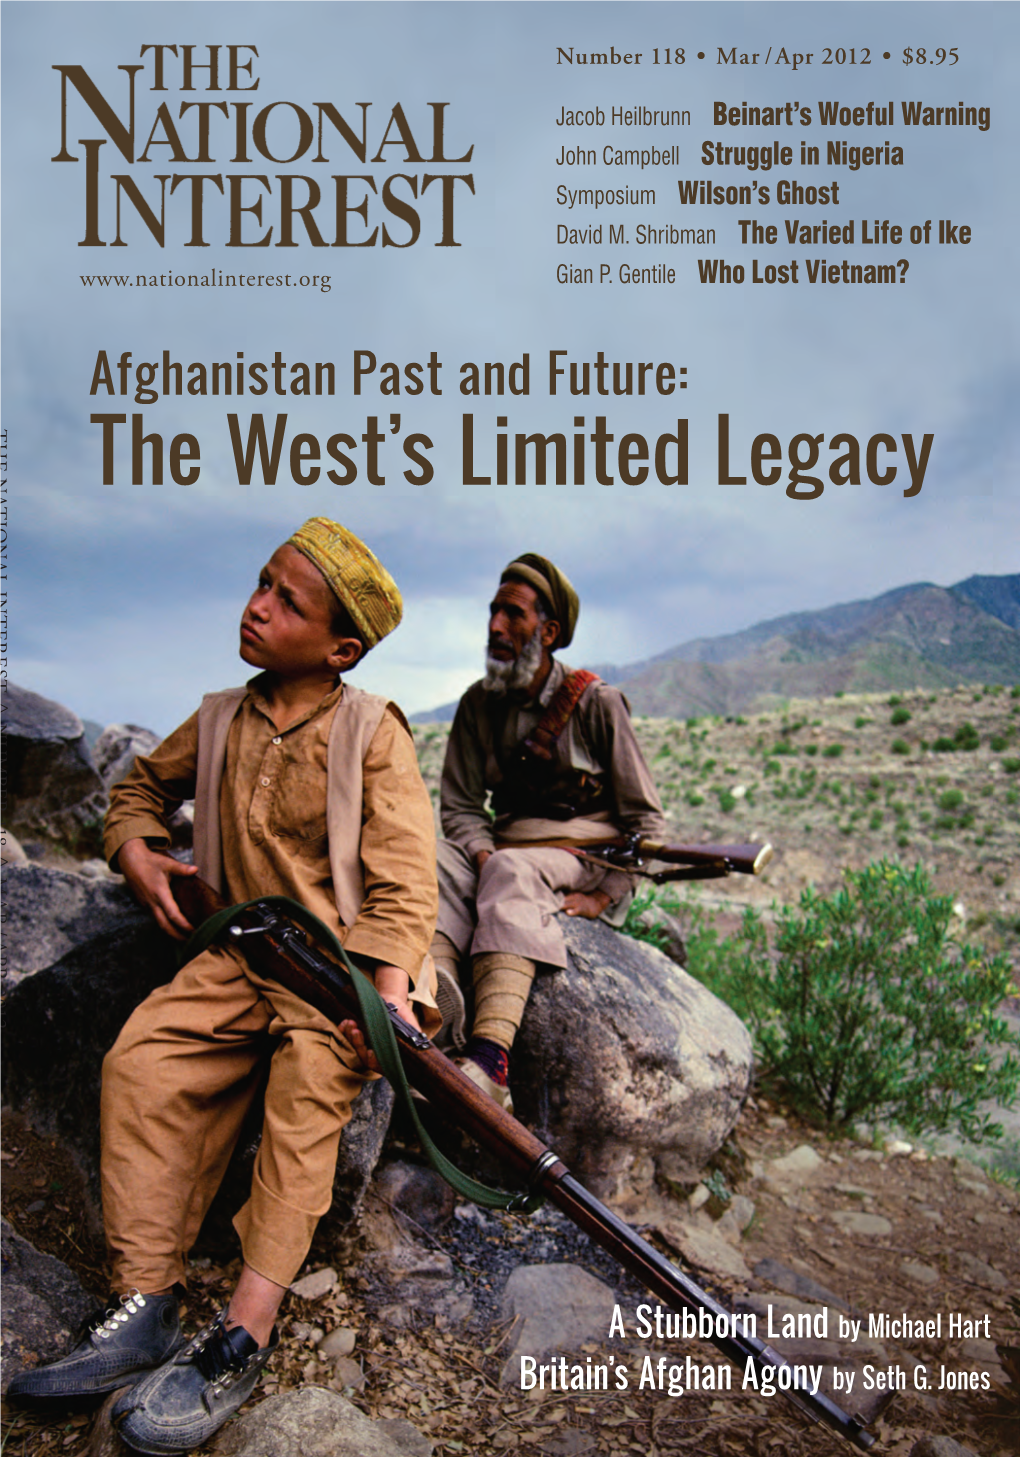 The West's Limited Legacy